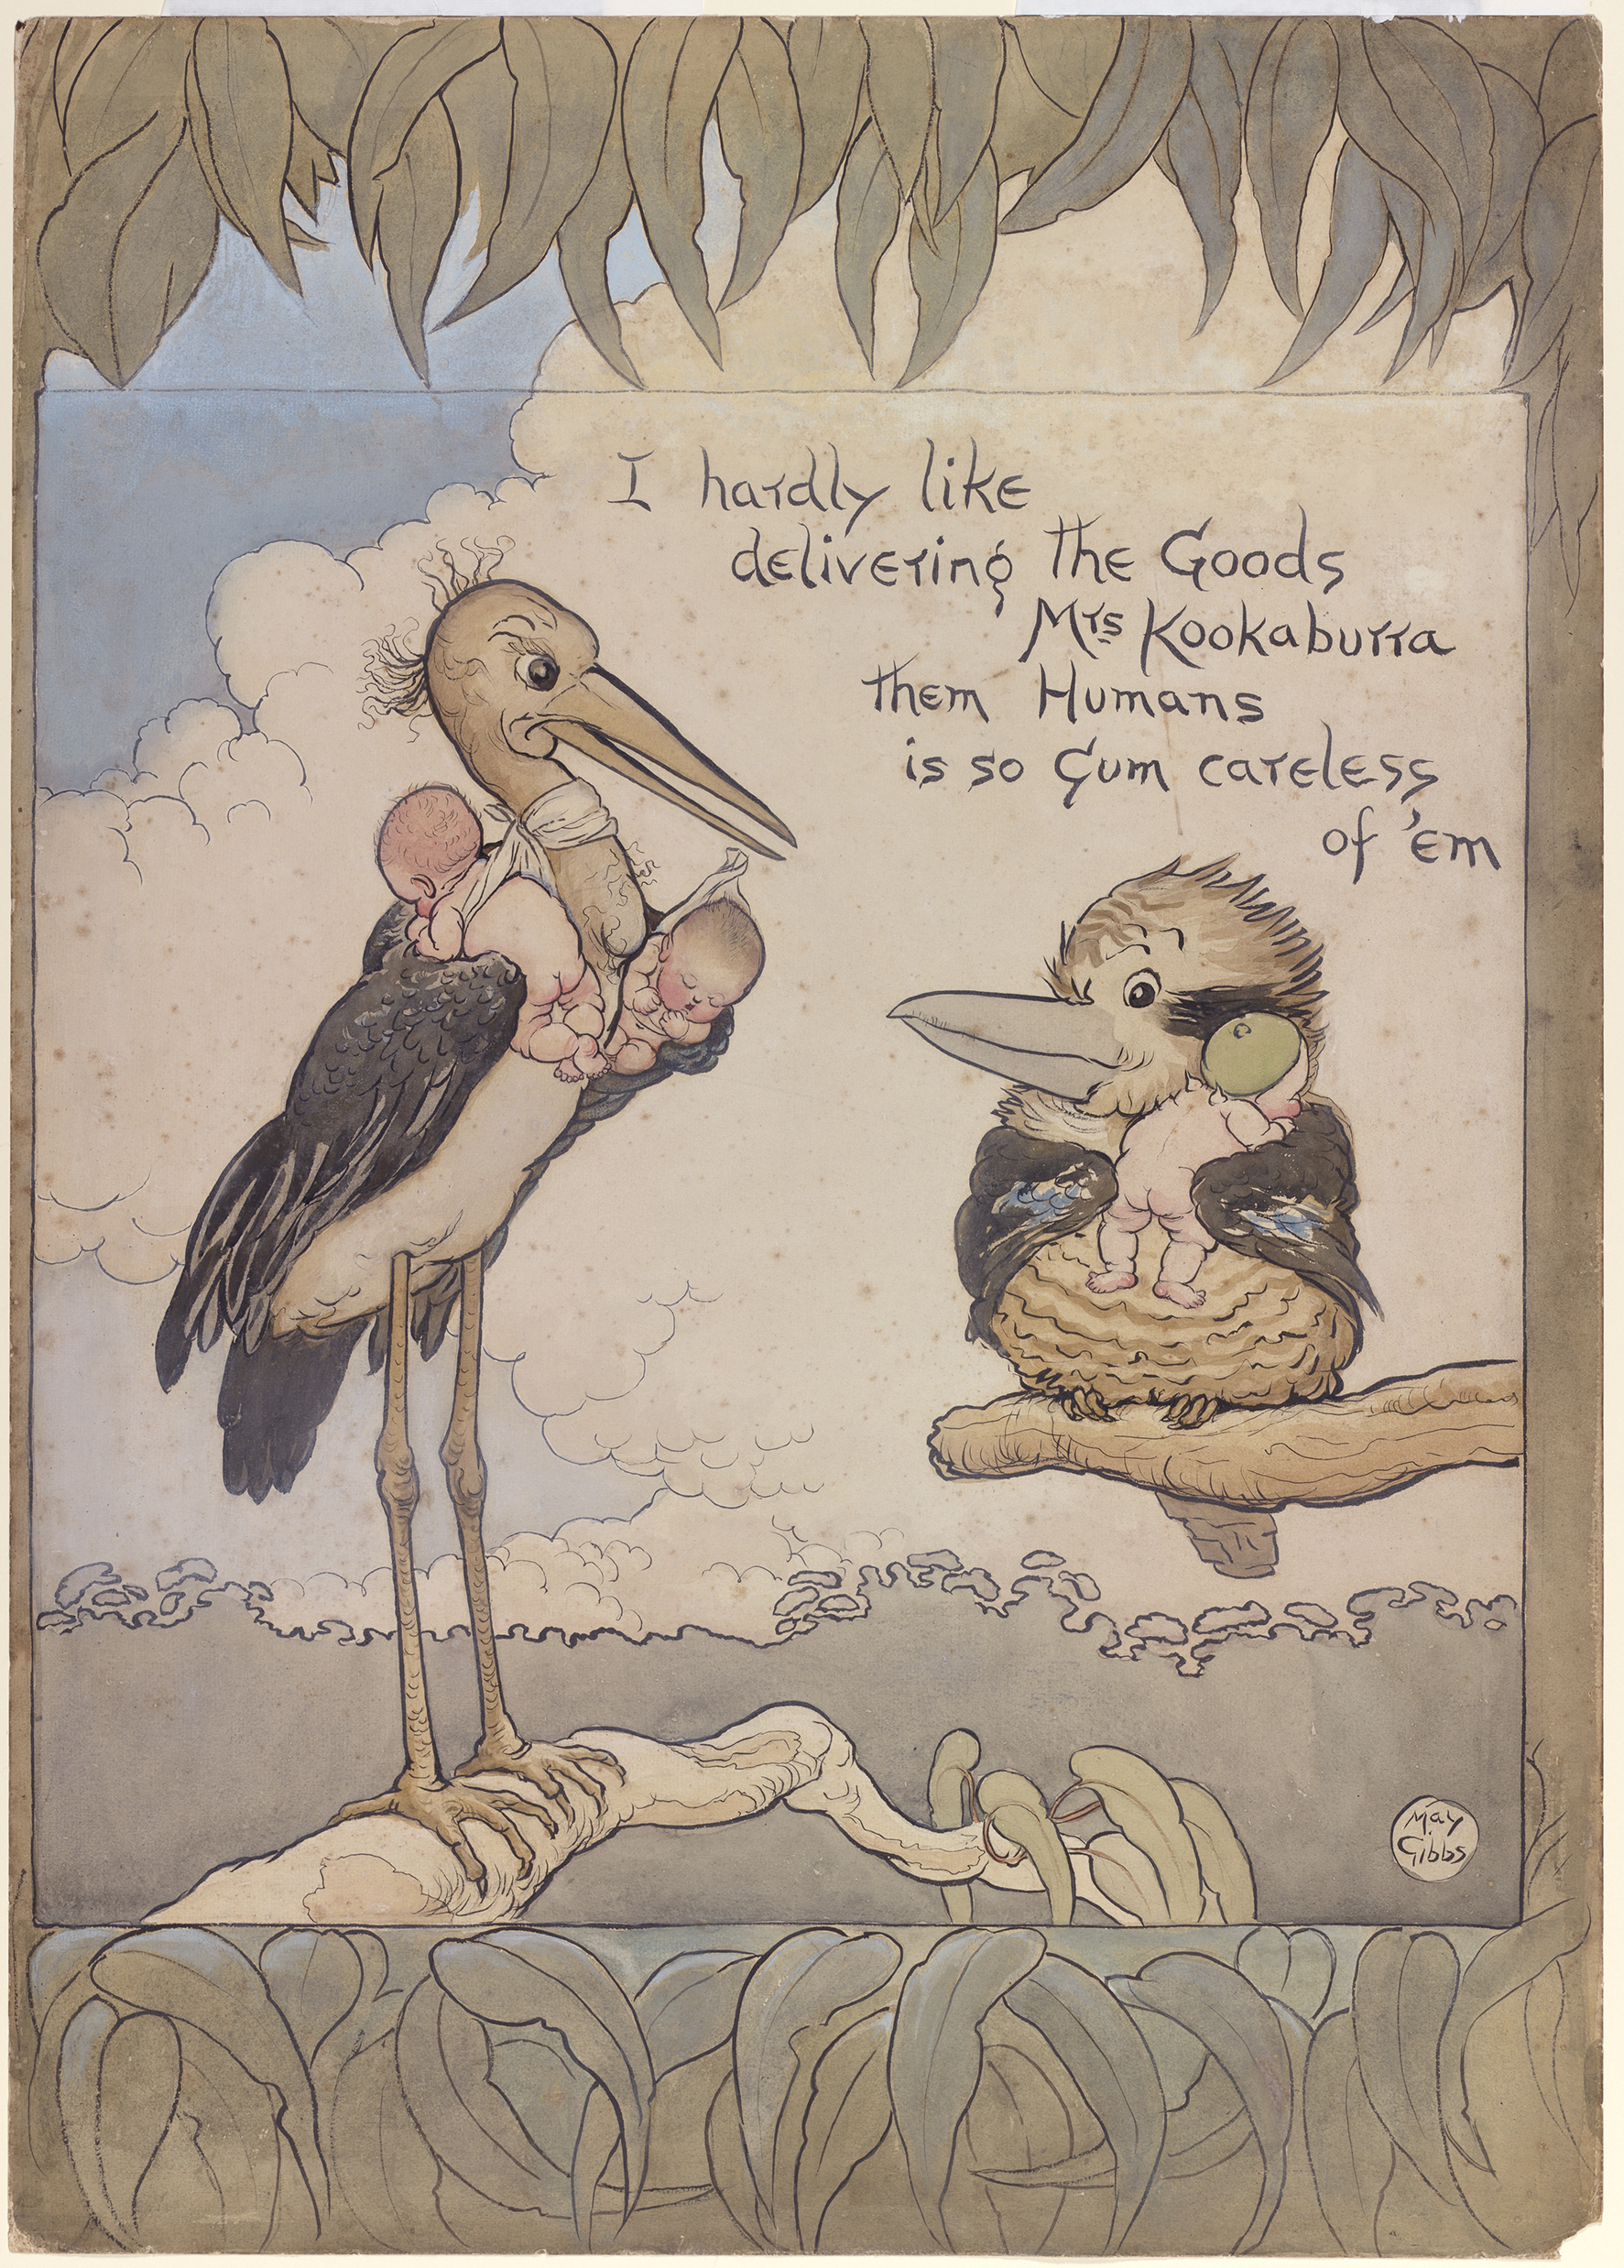 A hand drawn illustration of a stork, holding two babies, having delivered another baby to a Kookaburra